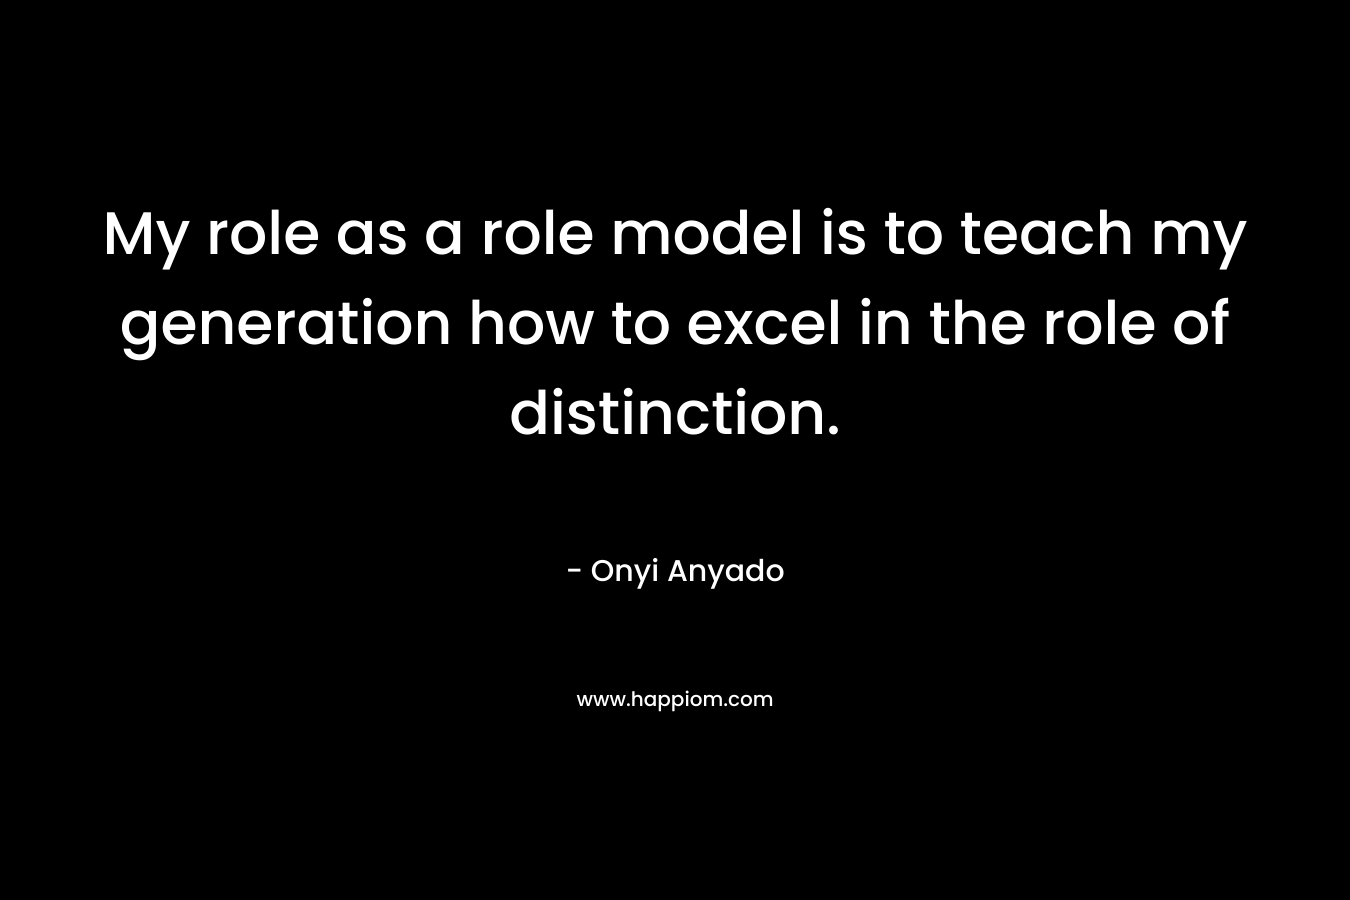 My role as a role model is to teach my generation how to excel in the role of distinction. – Onyi Anyado